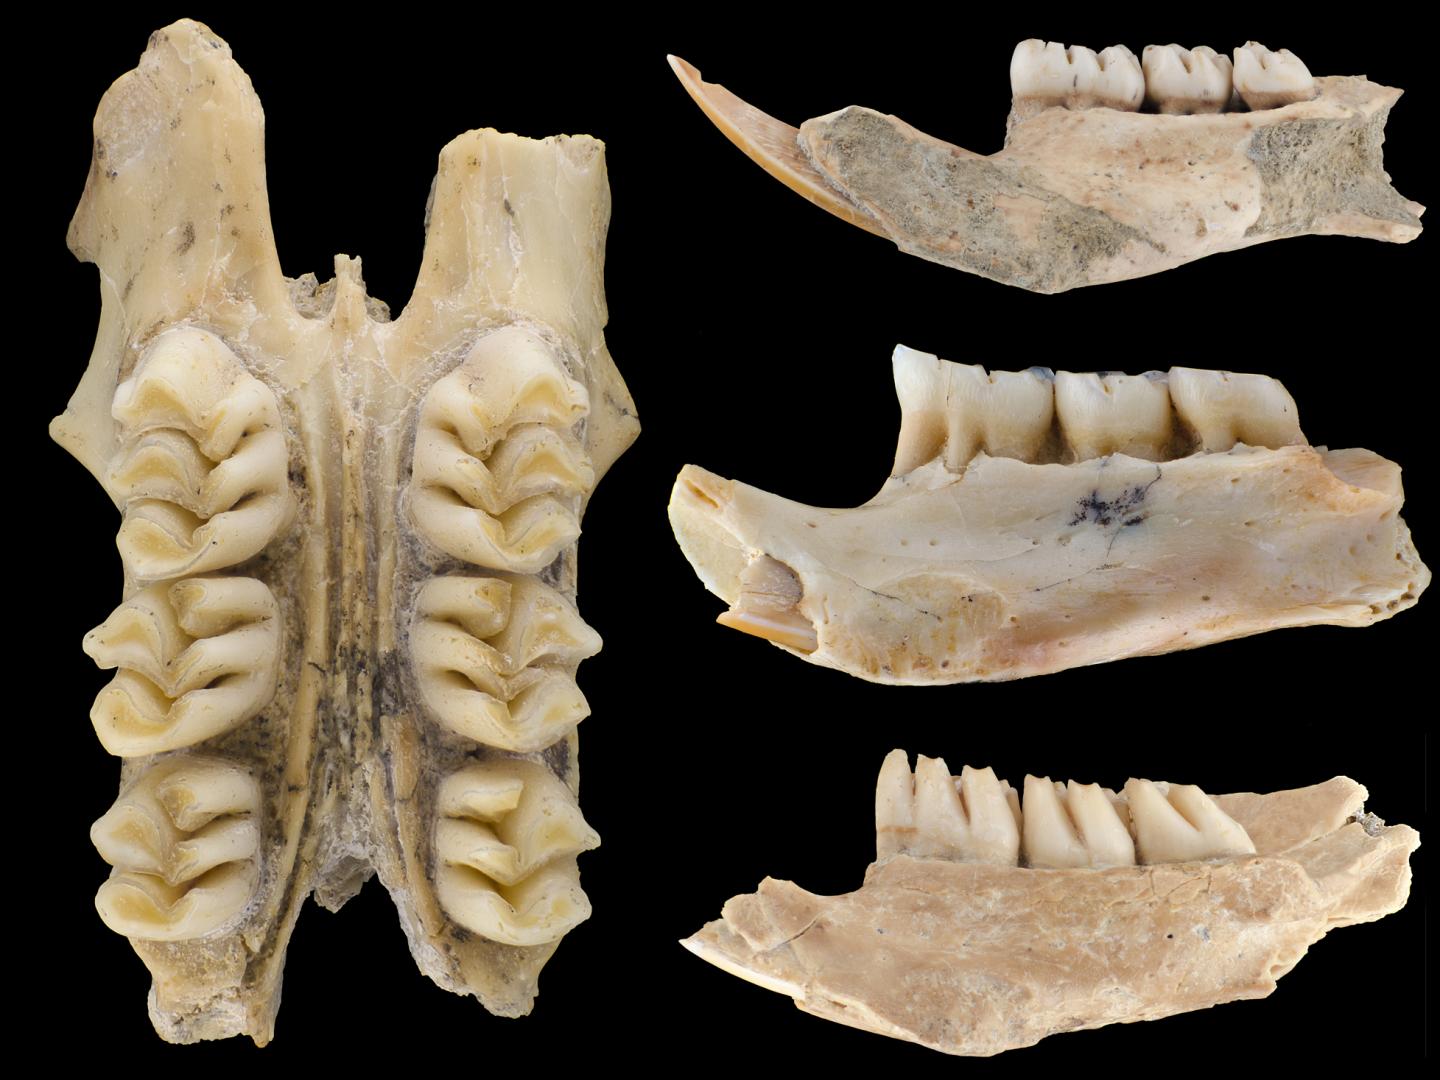 The teeth of the giant rats were important in distinguishing them as new species. (Image: Lauren Nassef, Field Museum)